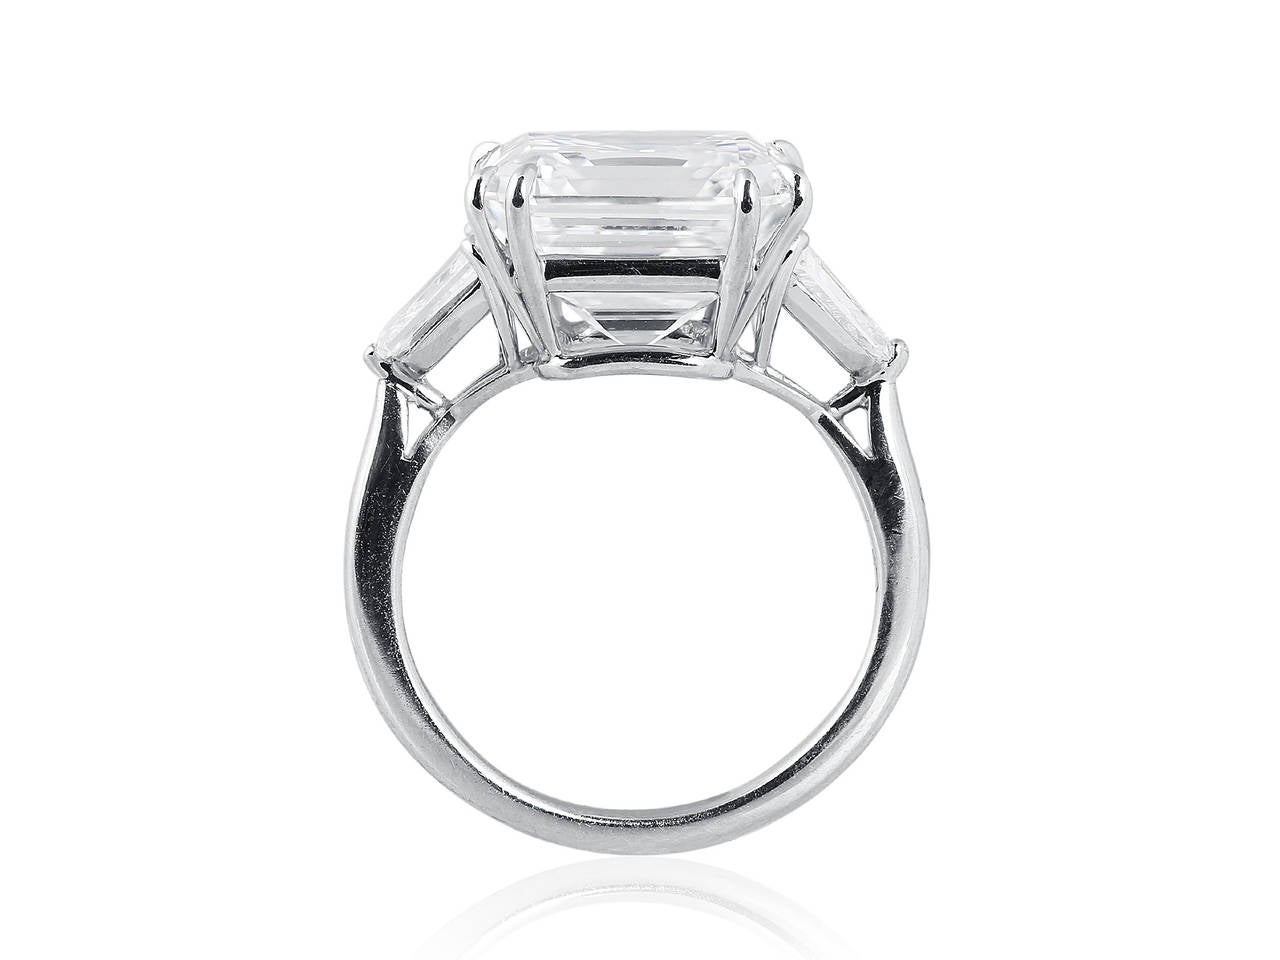 Platinum 3 stone estate ring set with a stunning 8.02ct asscher cut diamond having a color and clarity of G-VS1, with GIA report #5121556626. The center diamond is flanked by two shield cut gem white diamonds totaling 1.5 carats, signed Harry